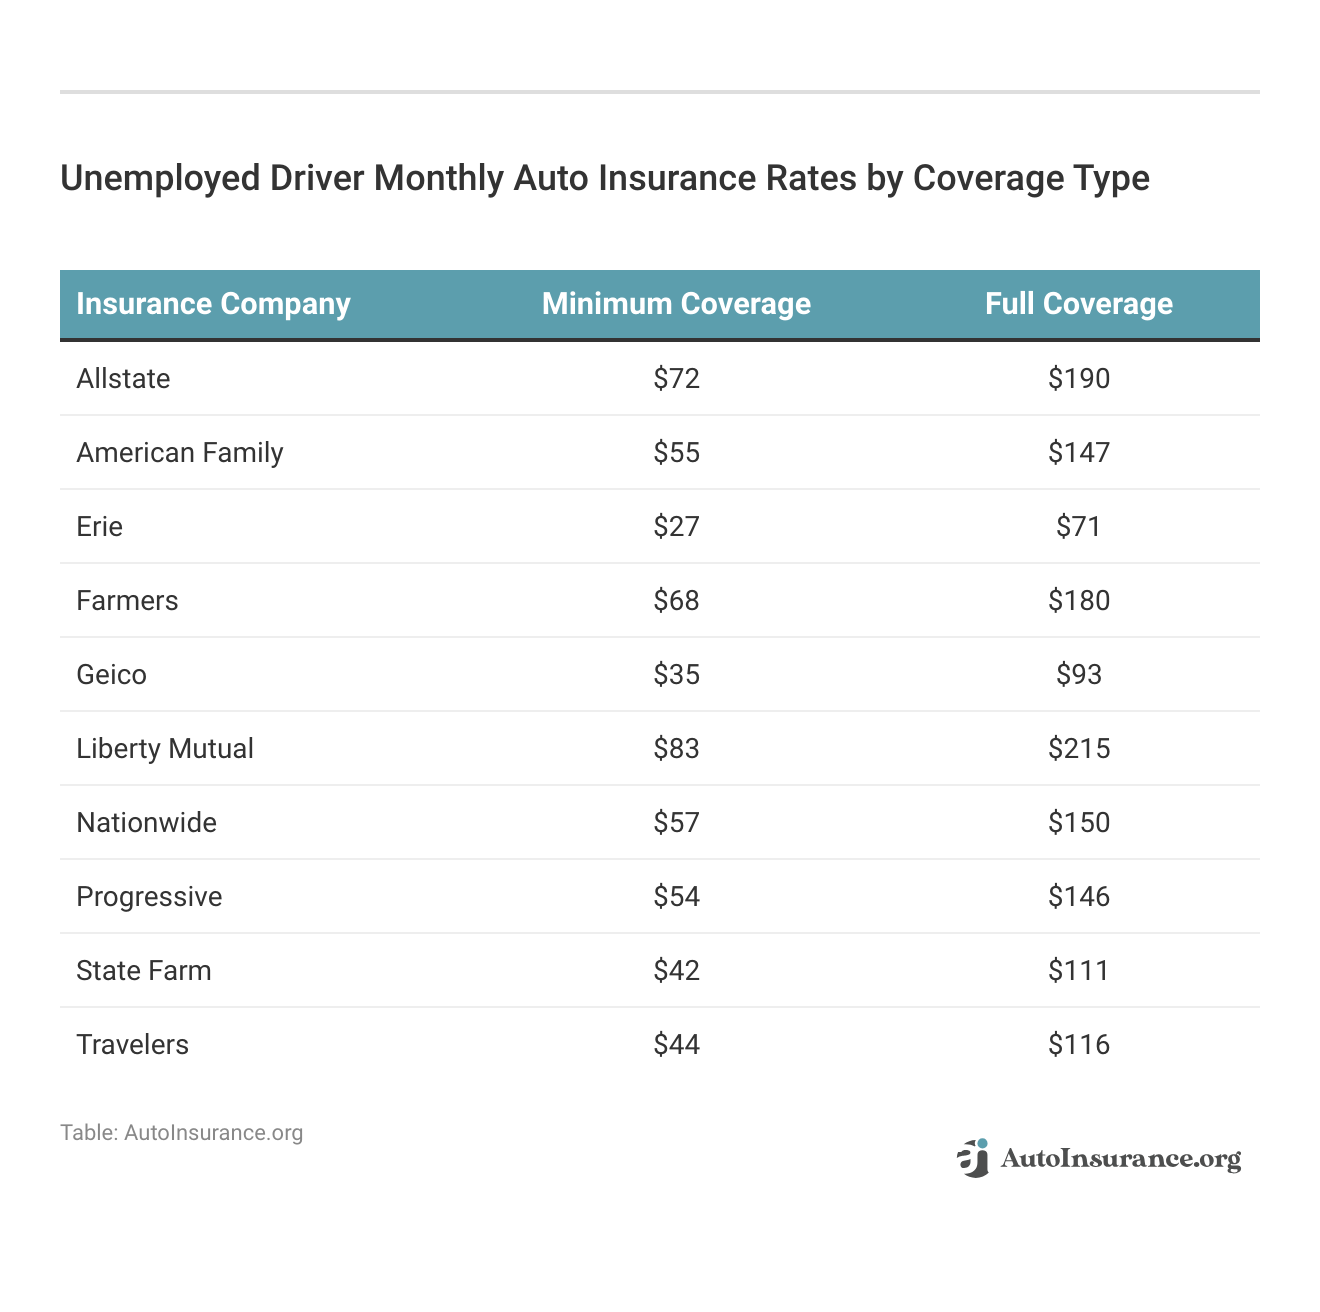 <h3>Unemployed Driver Monthly Auto Insurance Rates by Coverage Type</h3>